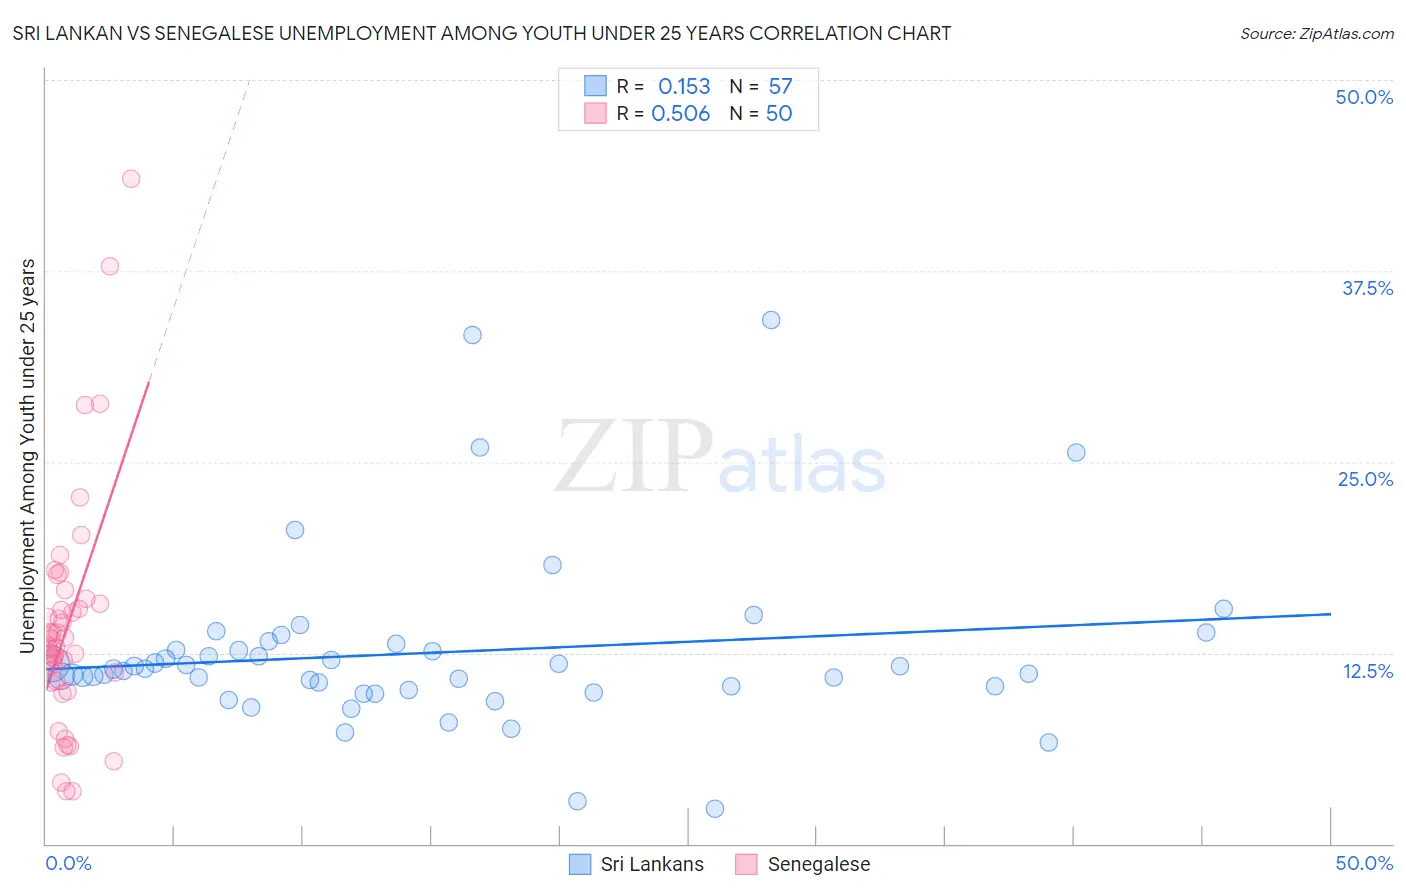 Sri Lankan vs Senegalese Unemployment Among Youth under 25 years